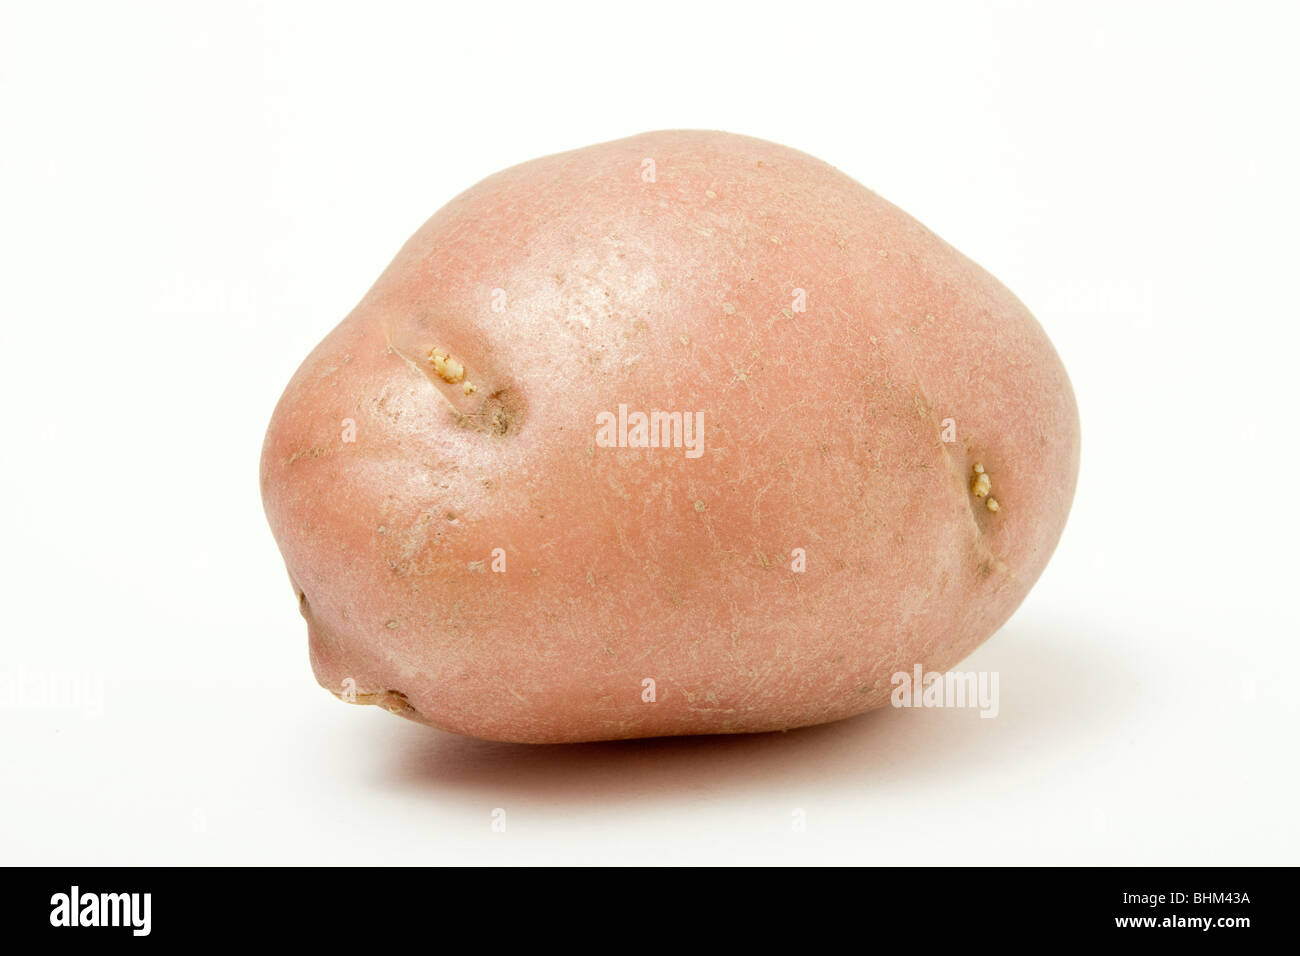 https://c8.alamy.com/comp/BHM43A/single-red-skin-potato-isolated-against-white-background-BHM43A.jpg